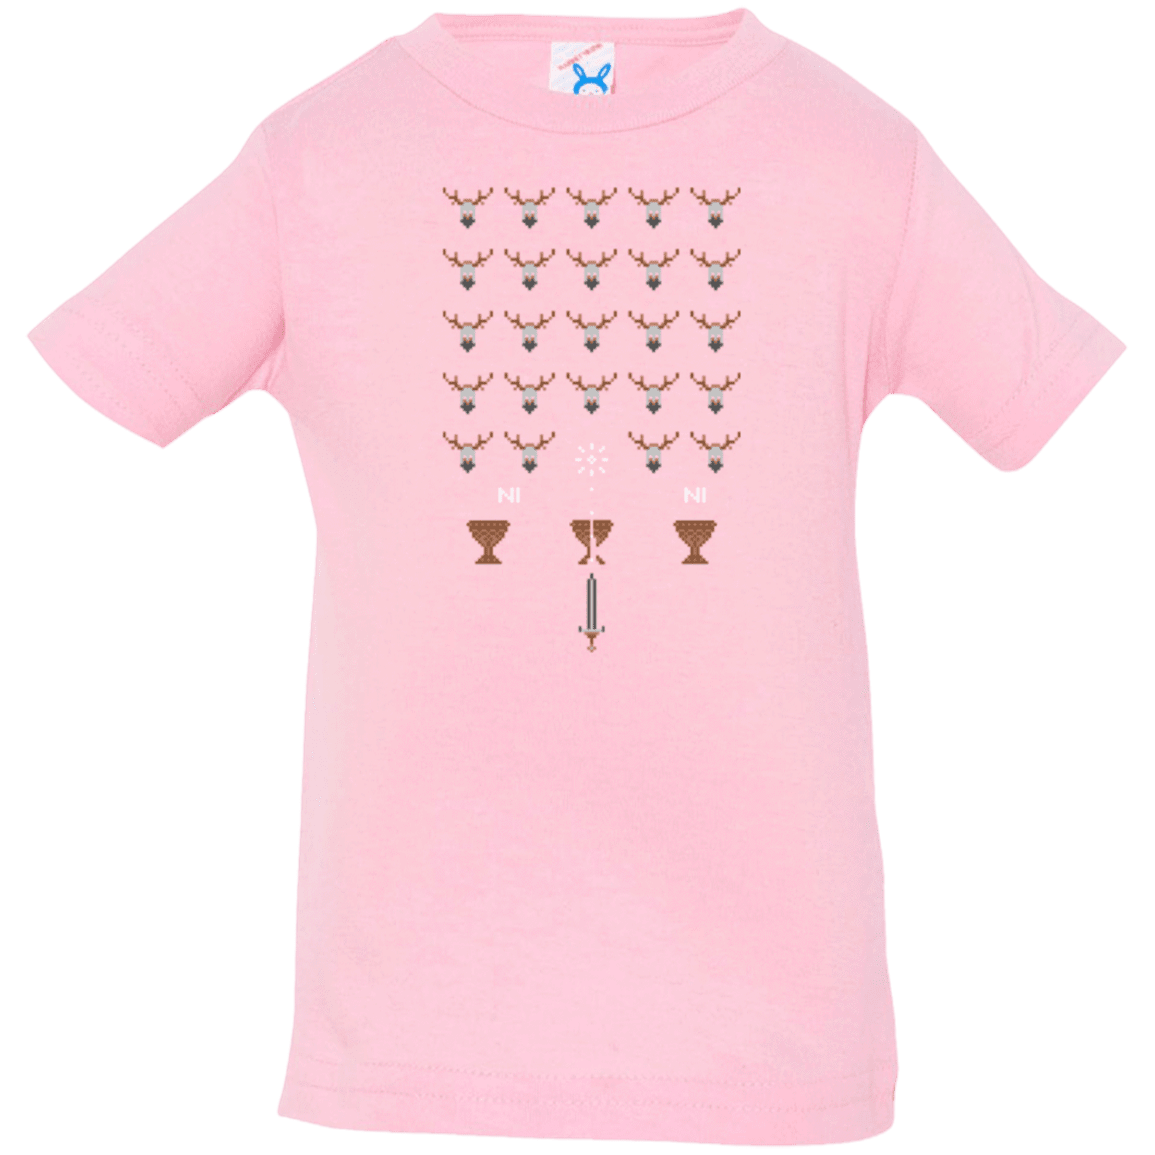 T-Shirts Pink / 6 Months Space NI Invaders Infant Premium T-Shirt